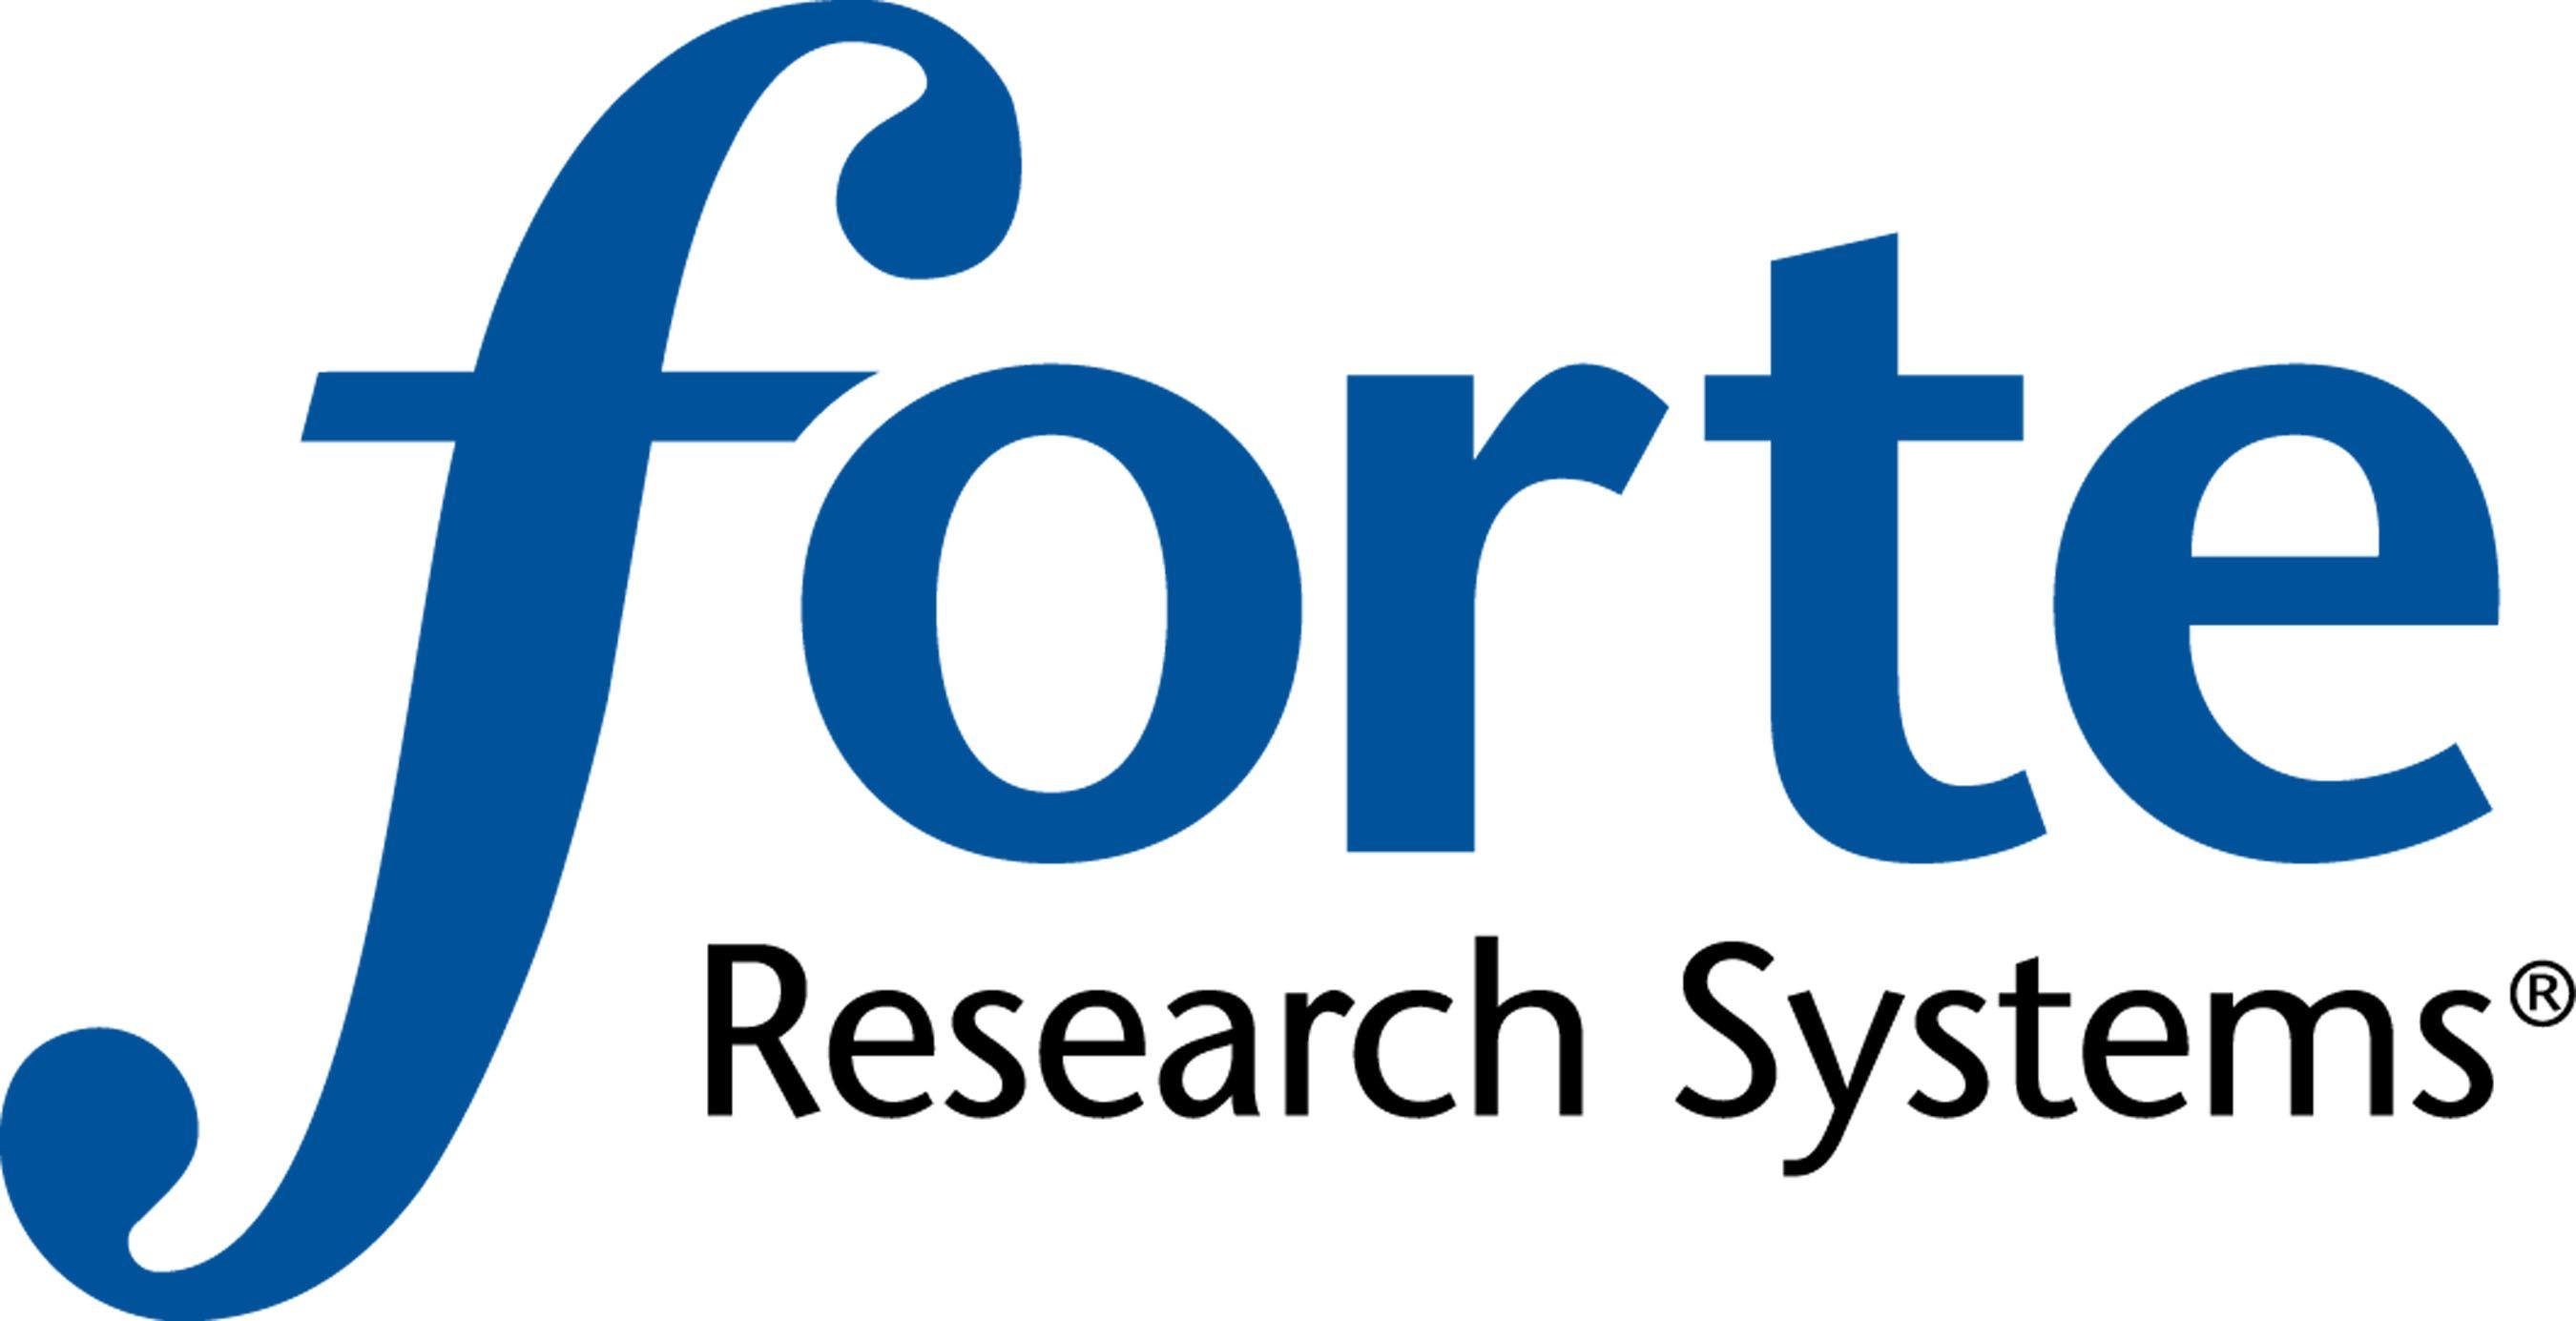 Forte Logo - FORTE RESEARCH SYSTEMS LOGO for Madison Public Schools